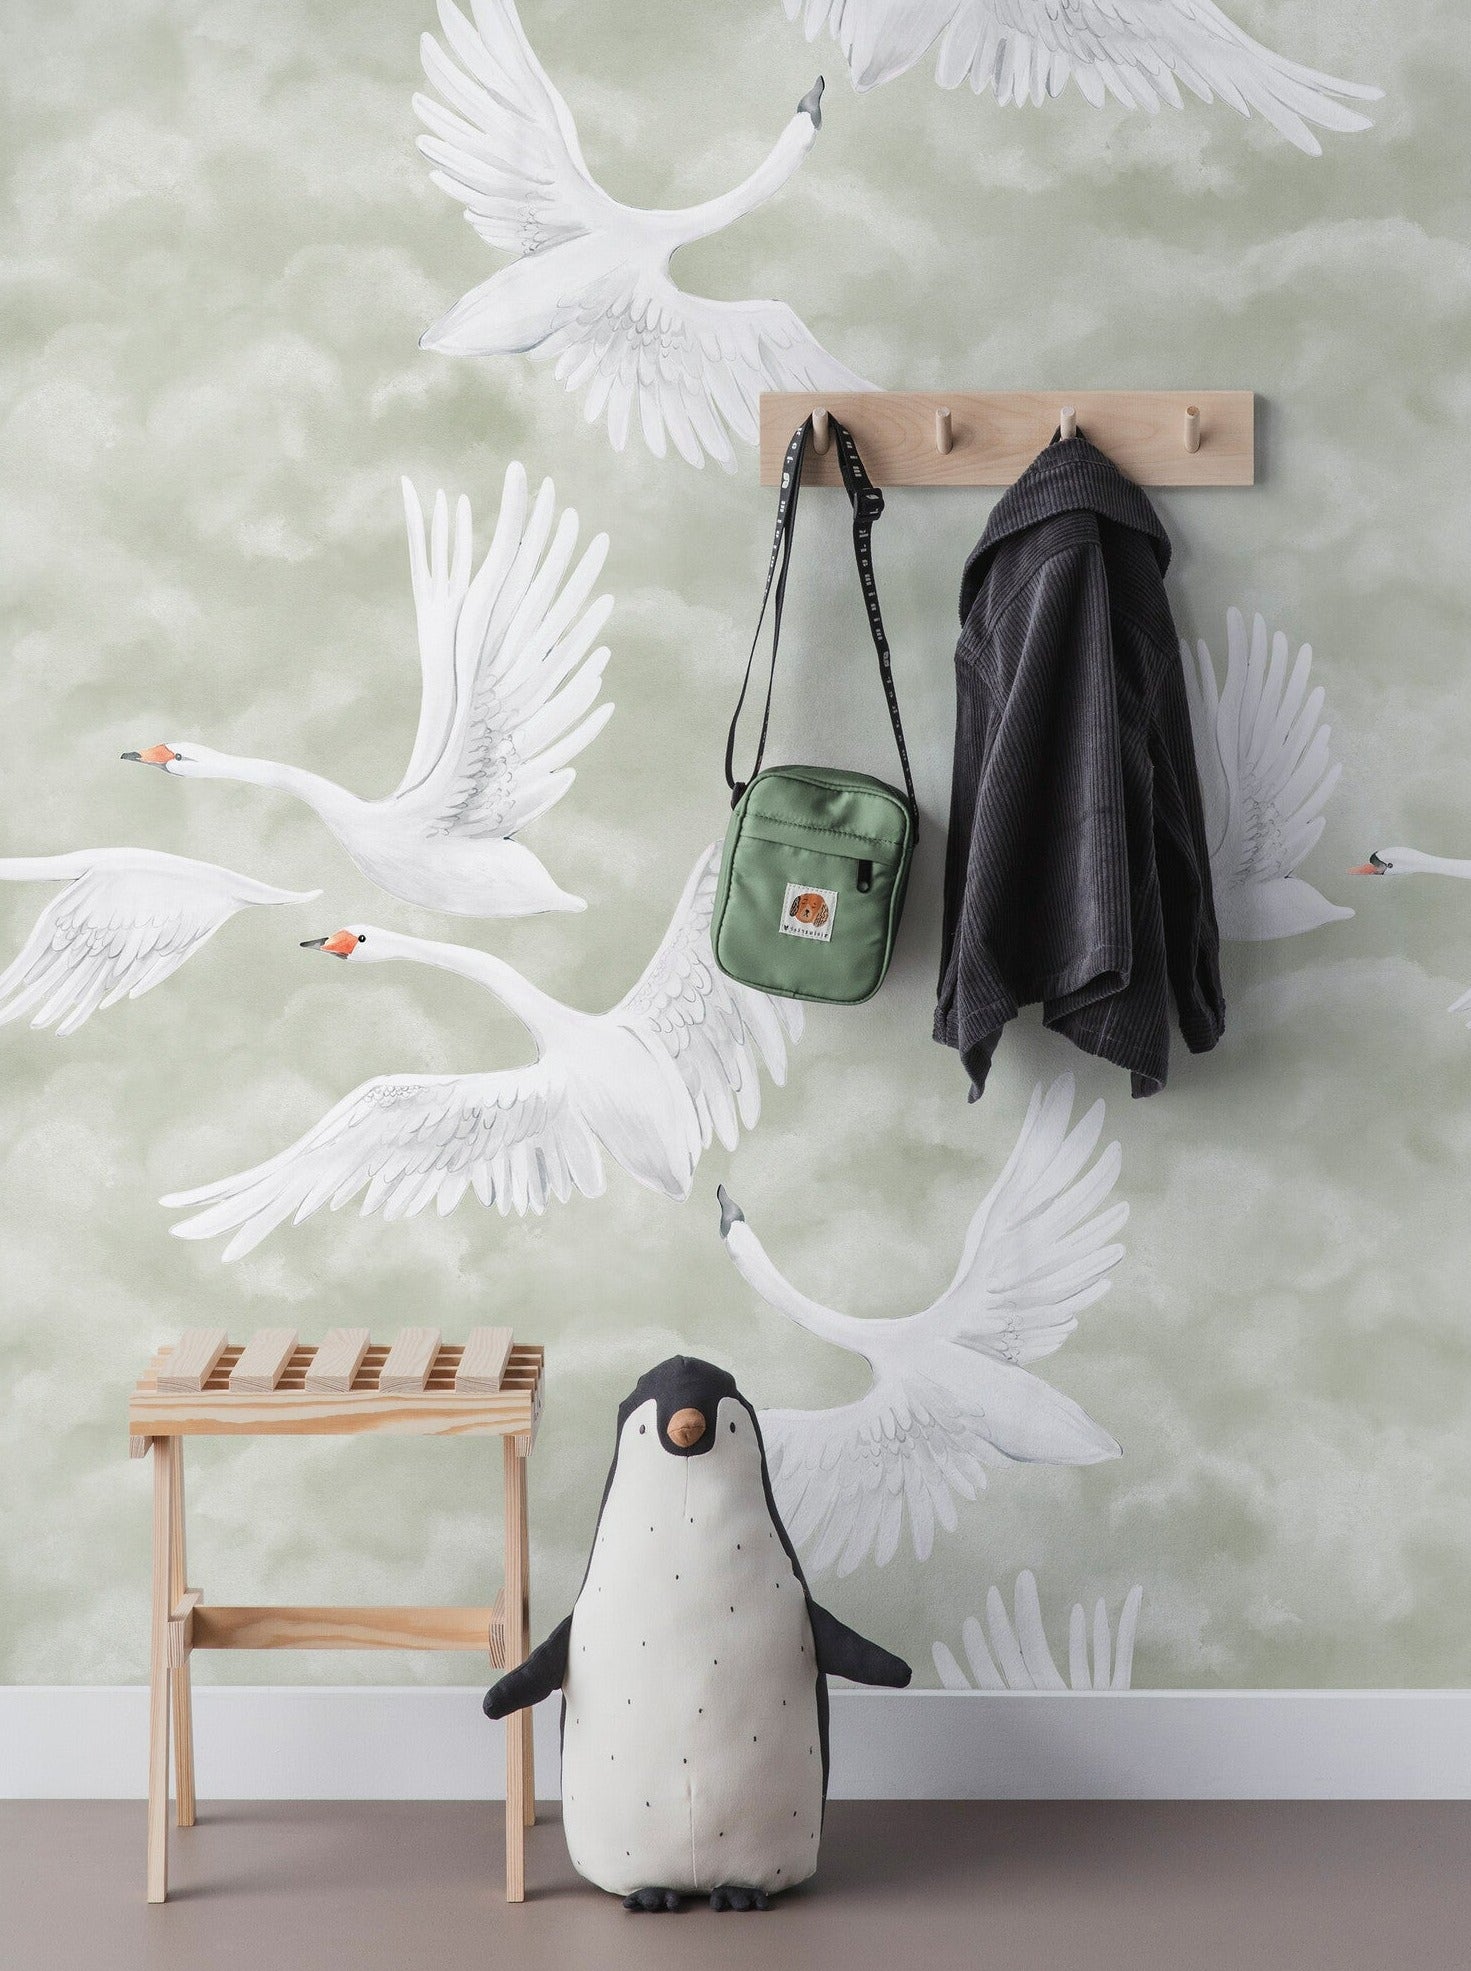 12 Beautiful Birds Inspired Products - Design Swan